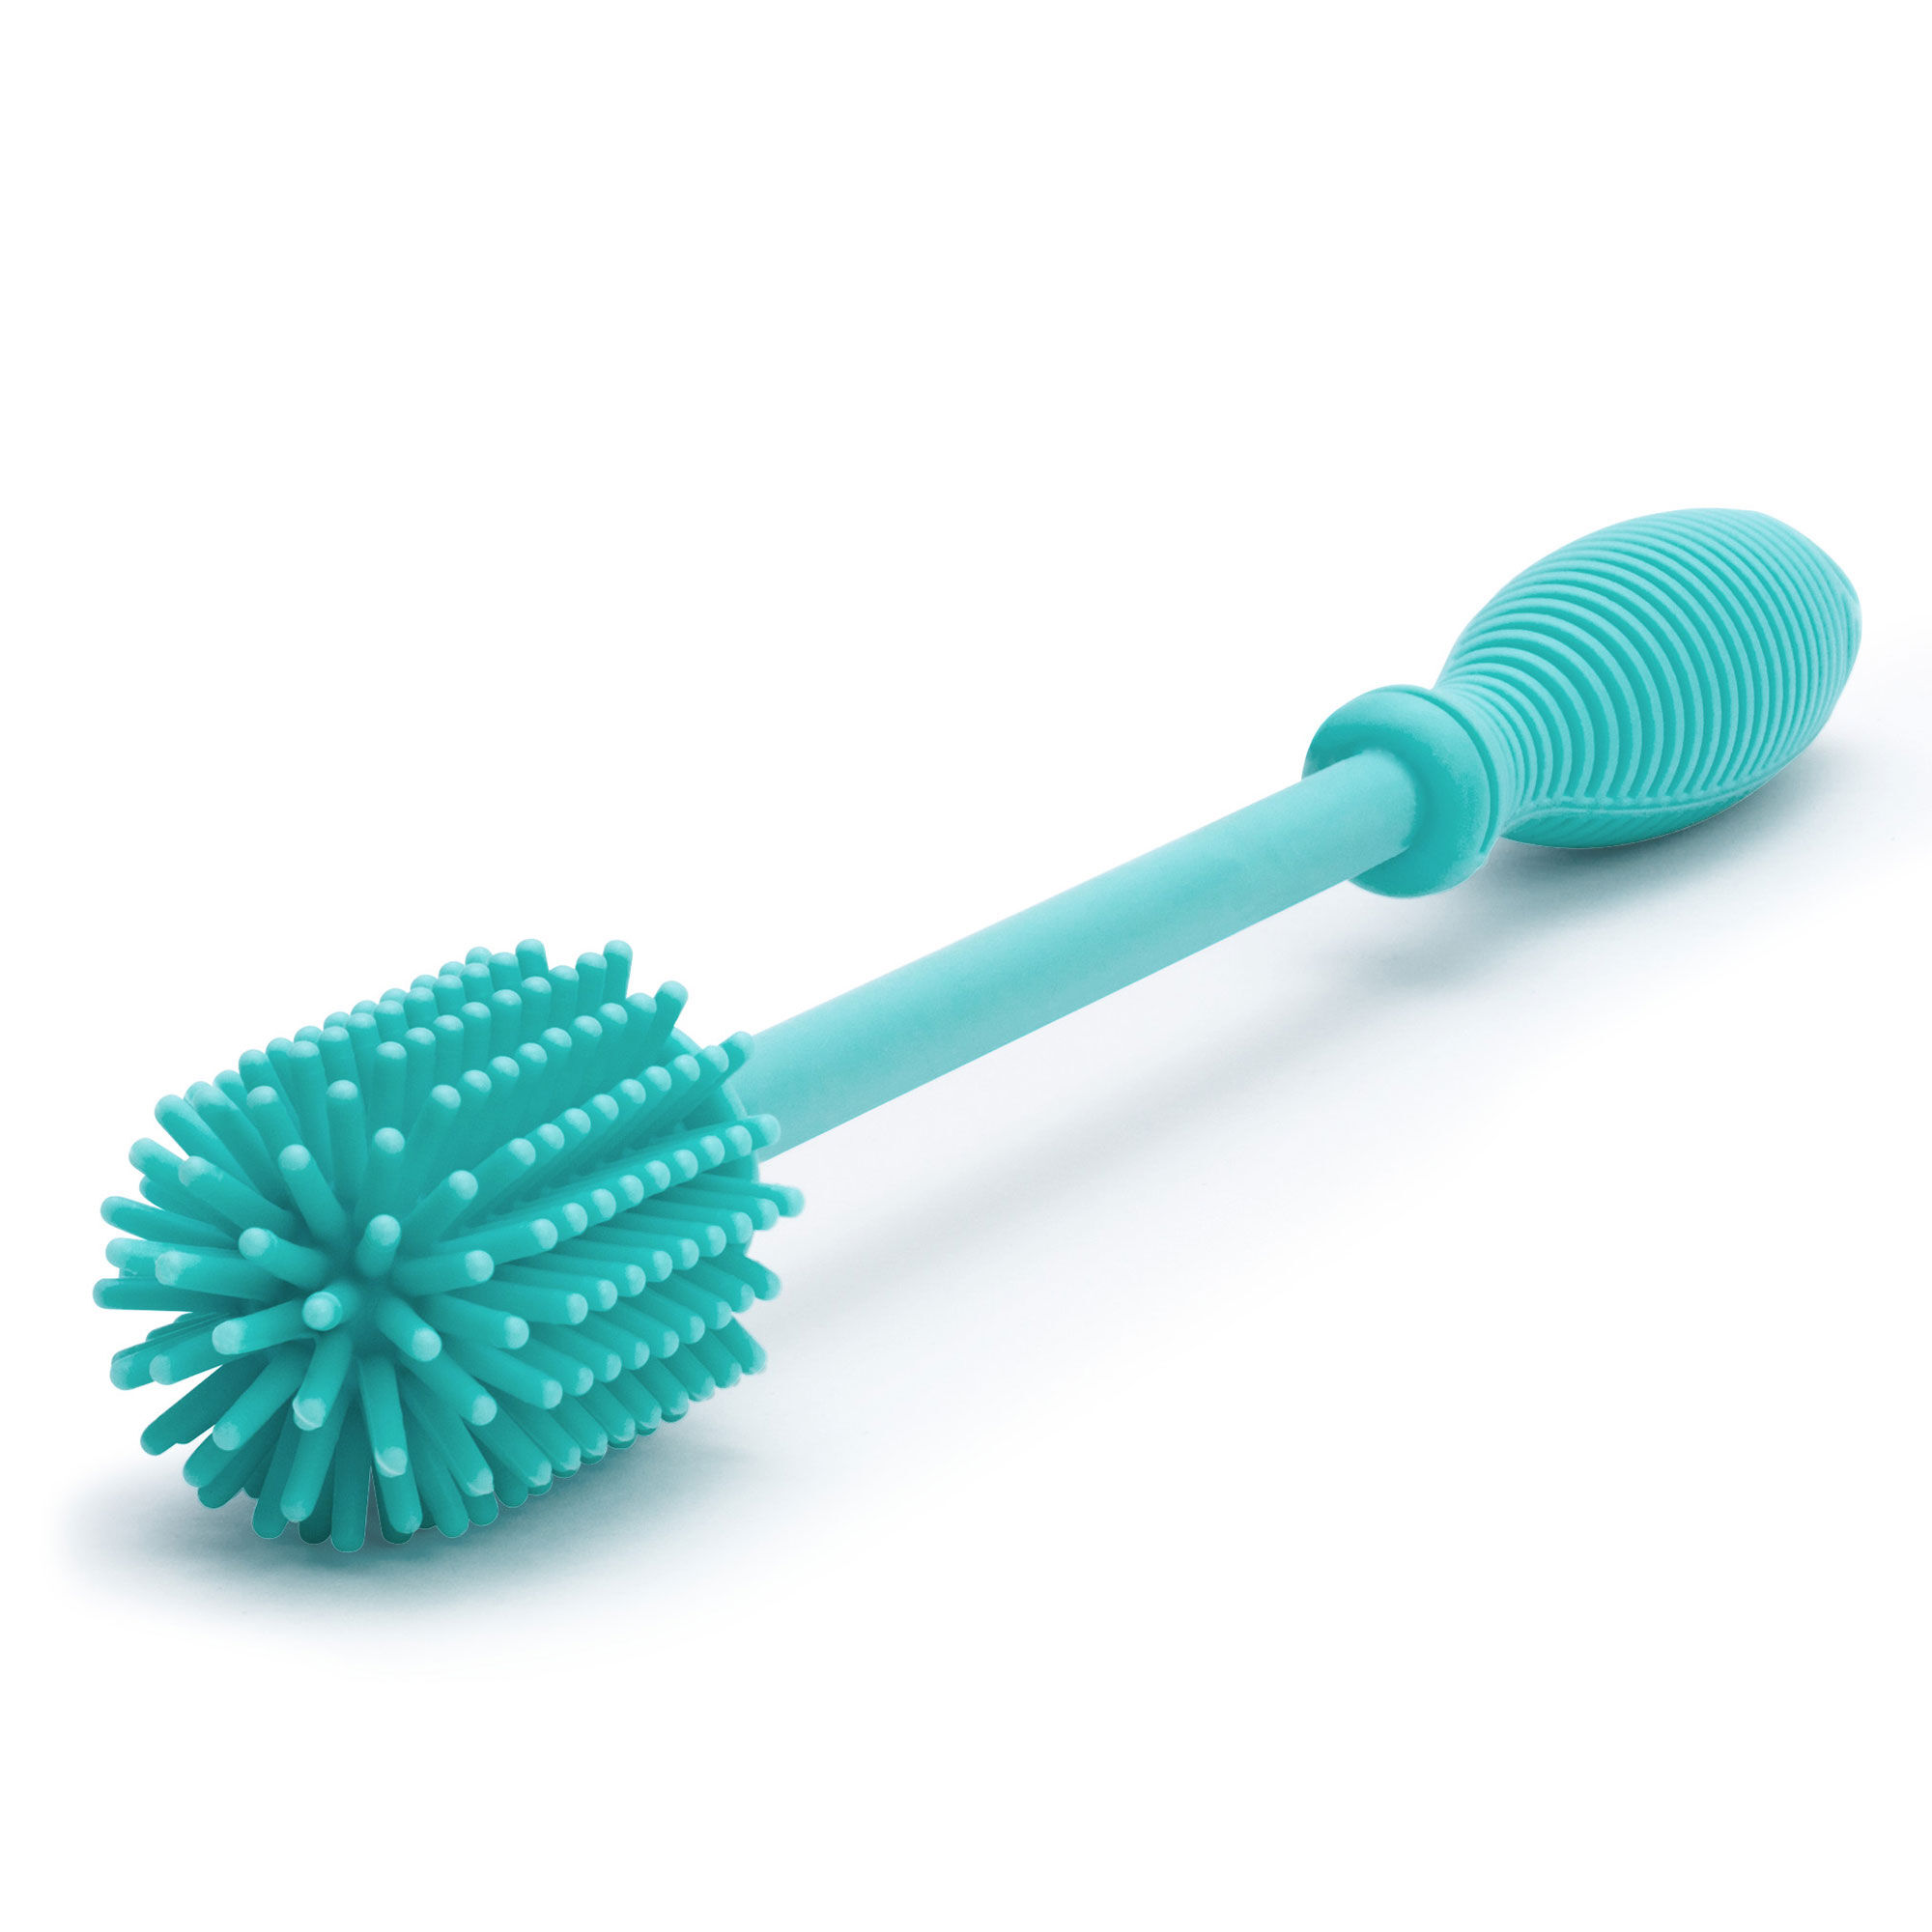 https://www.chiccousa.com/dw/image/v2/AAMT_PRD/on/demandware.static/-/Sites-chicco_catalog/default/dw205ce791/images/products/Nursing/Feeding_2019/chicco-bottle-brush.jpg?sw=2000&sh=2000&sm=fit